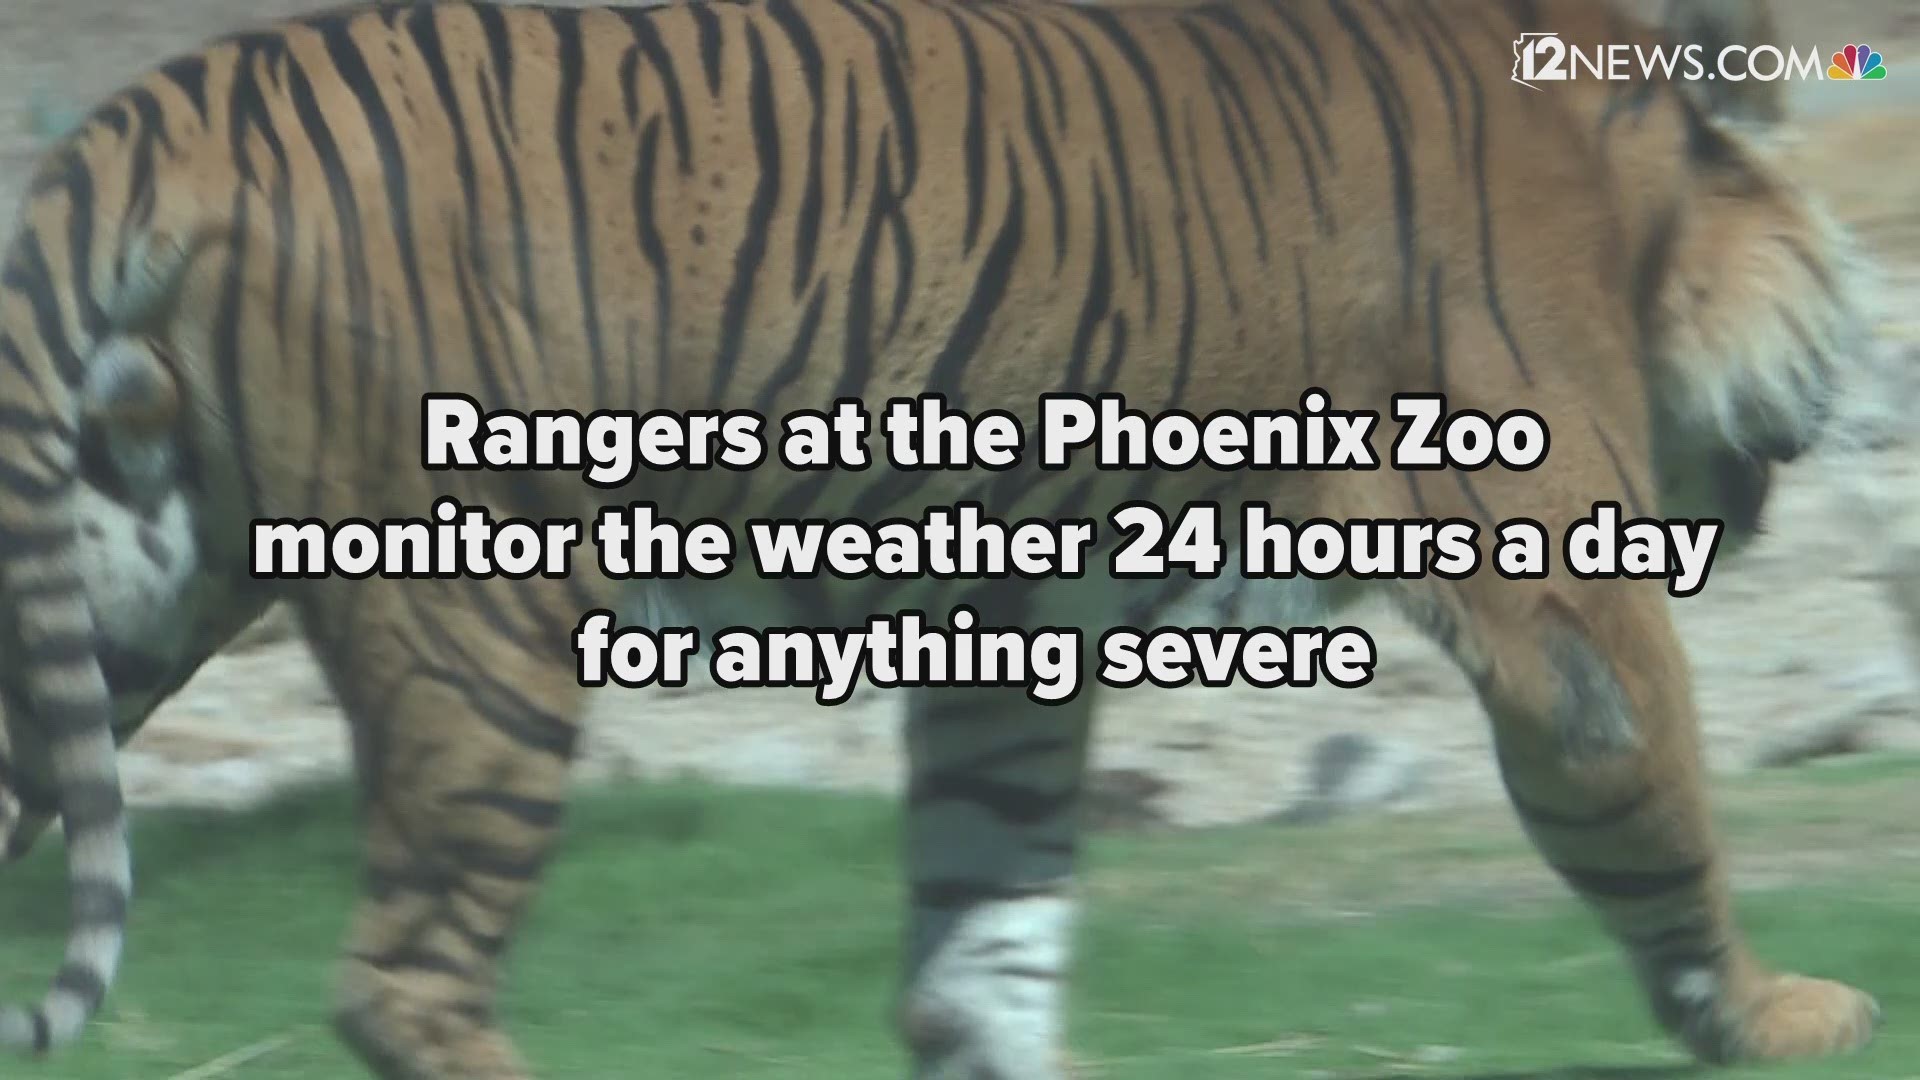 A lot of teamwork goes into making sure the animals at the Phoenix Zoo are safe.